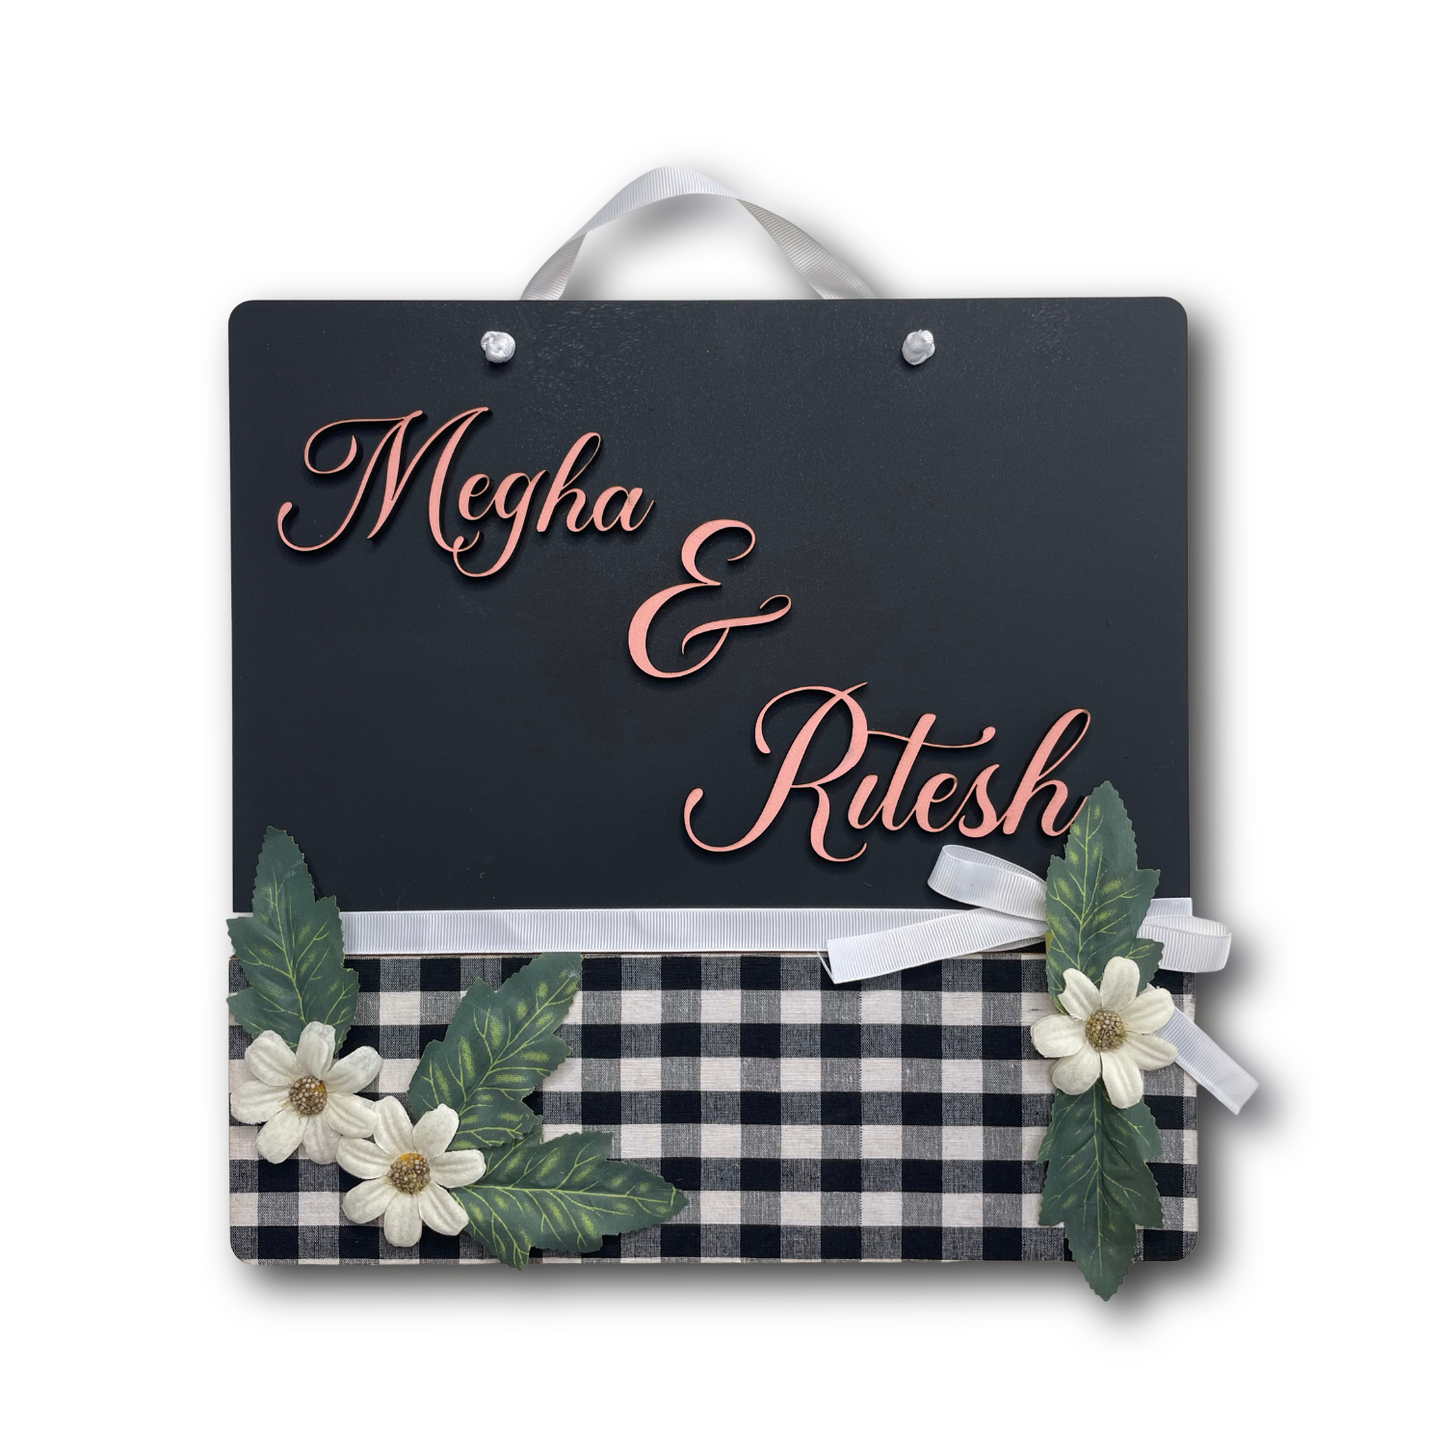 3D Black Square Nameplate With Buffalo Print For Personalization